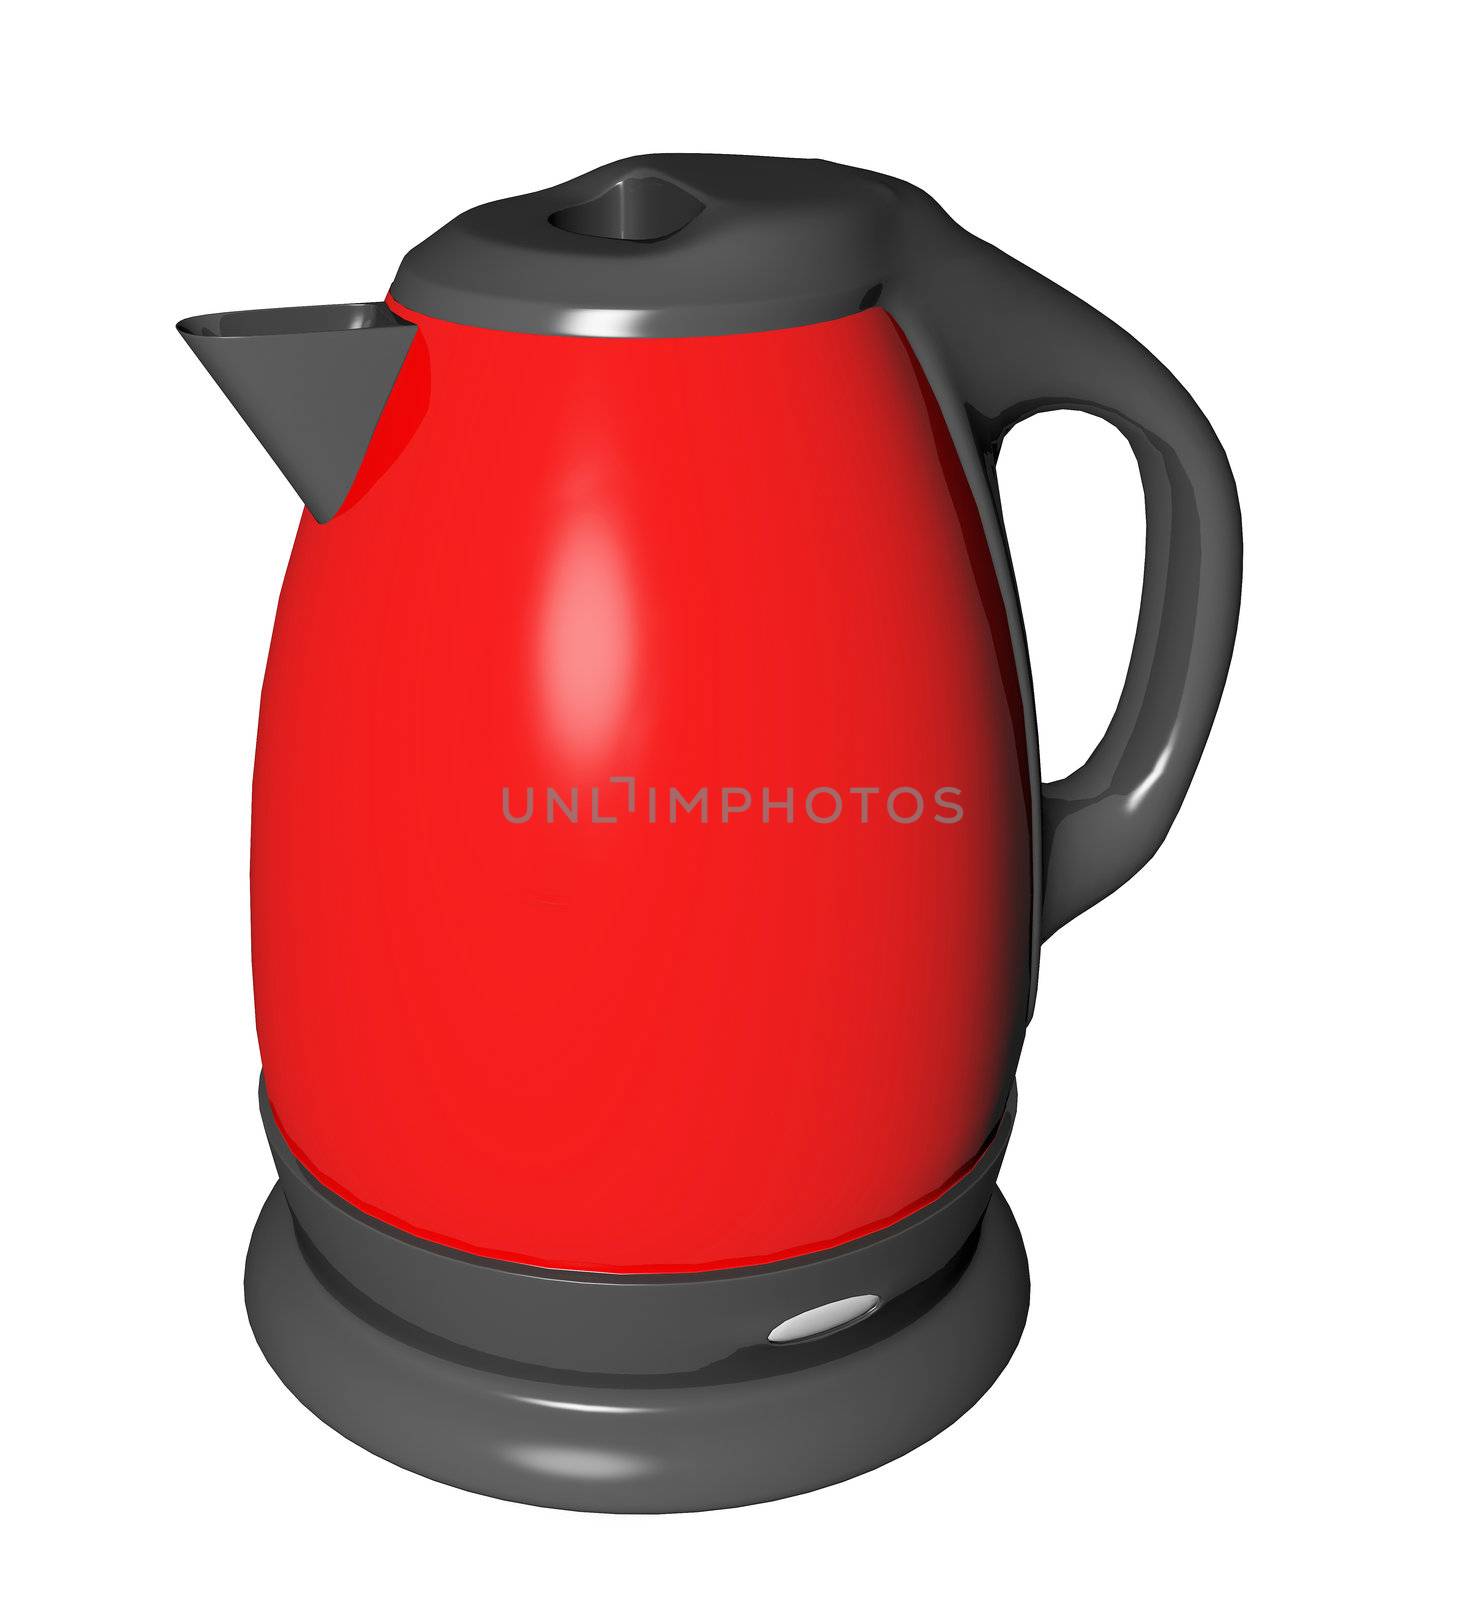 Red and black electric tea kettle, 3D illustration, isolated against a white background